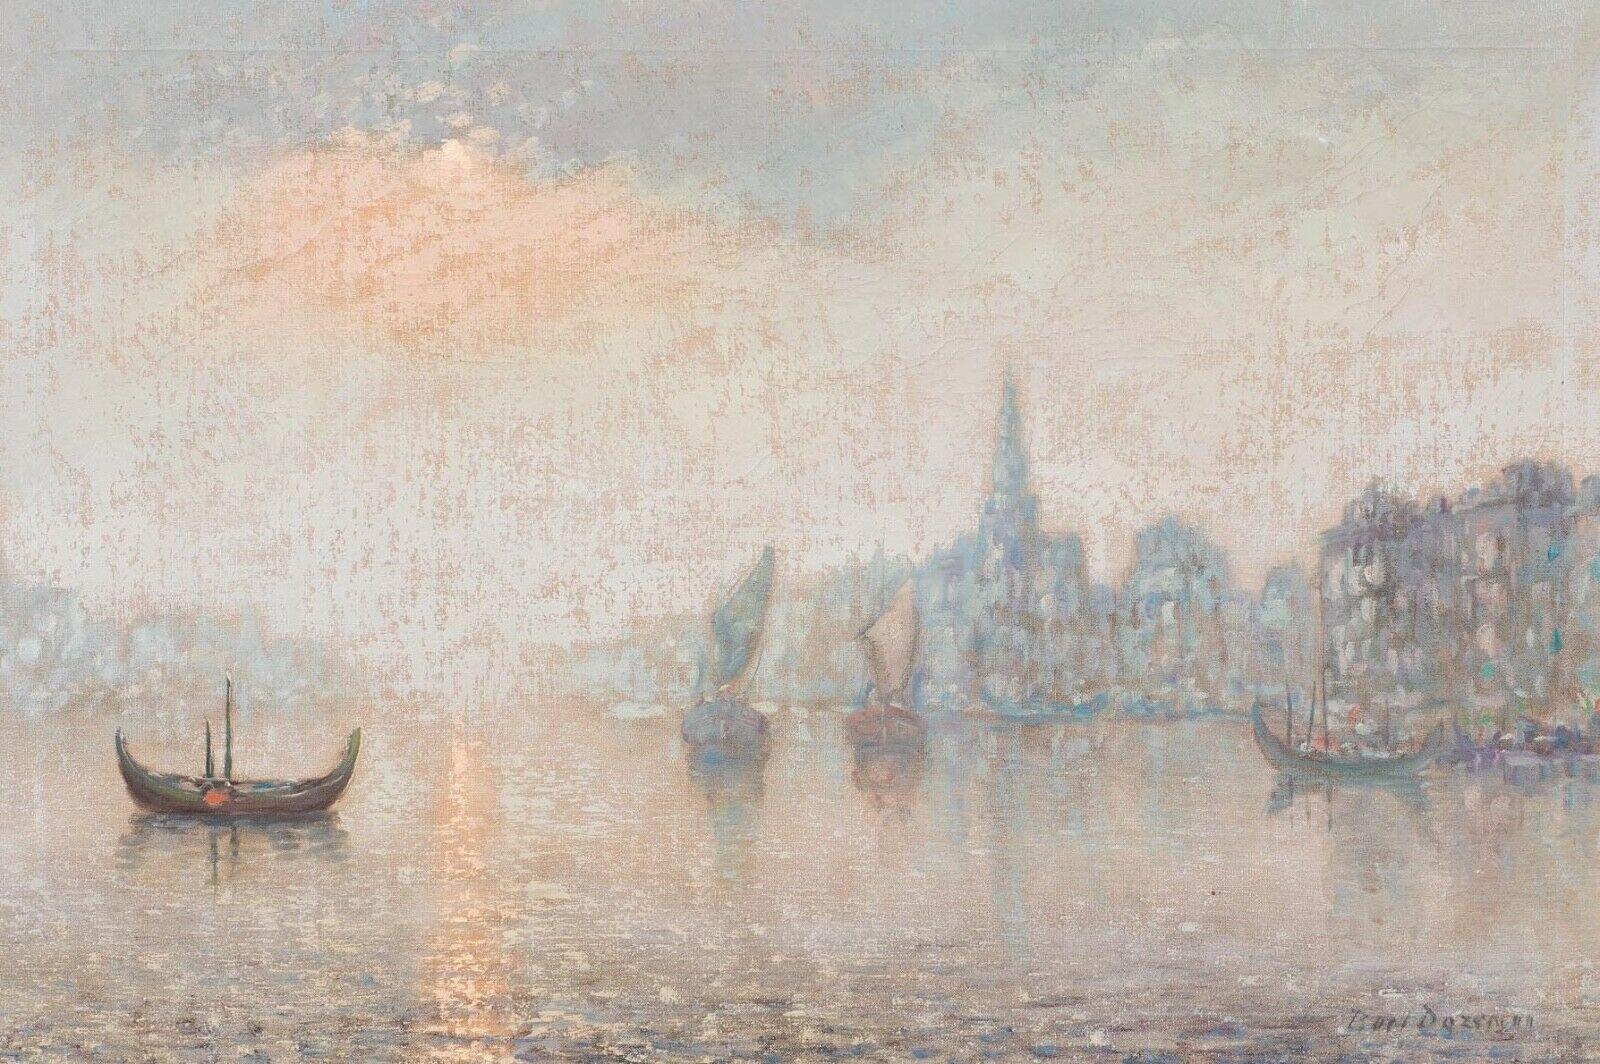 Unknown Landscape Painting – View Of A City At Night From The River, um 1900